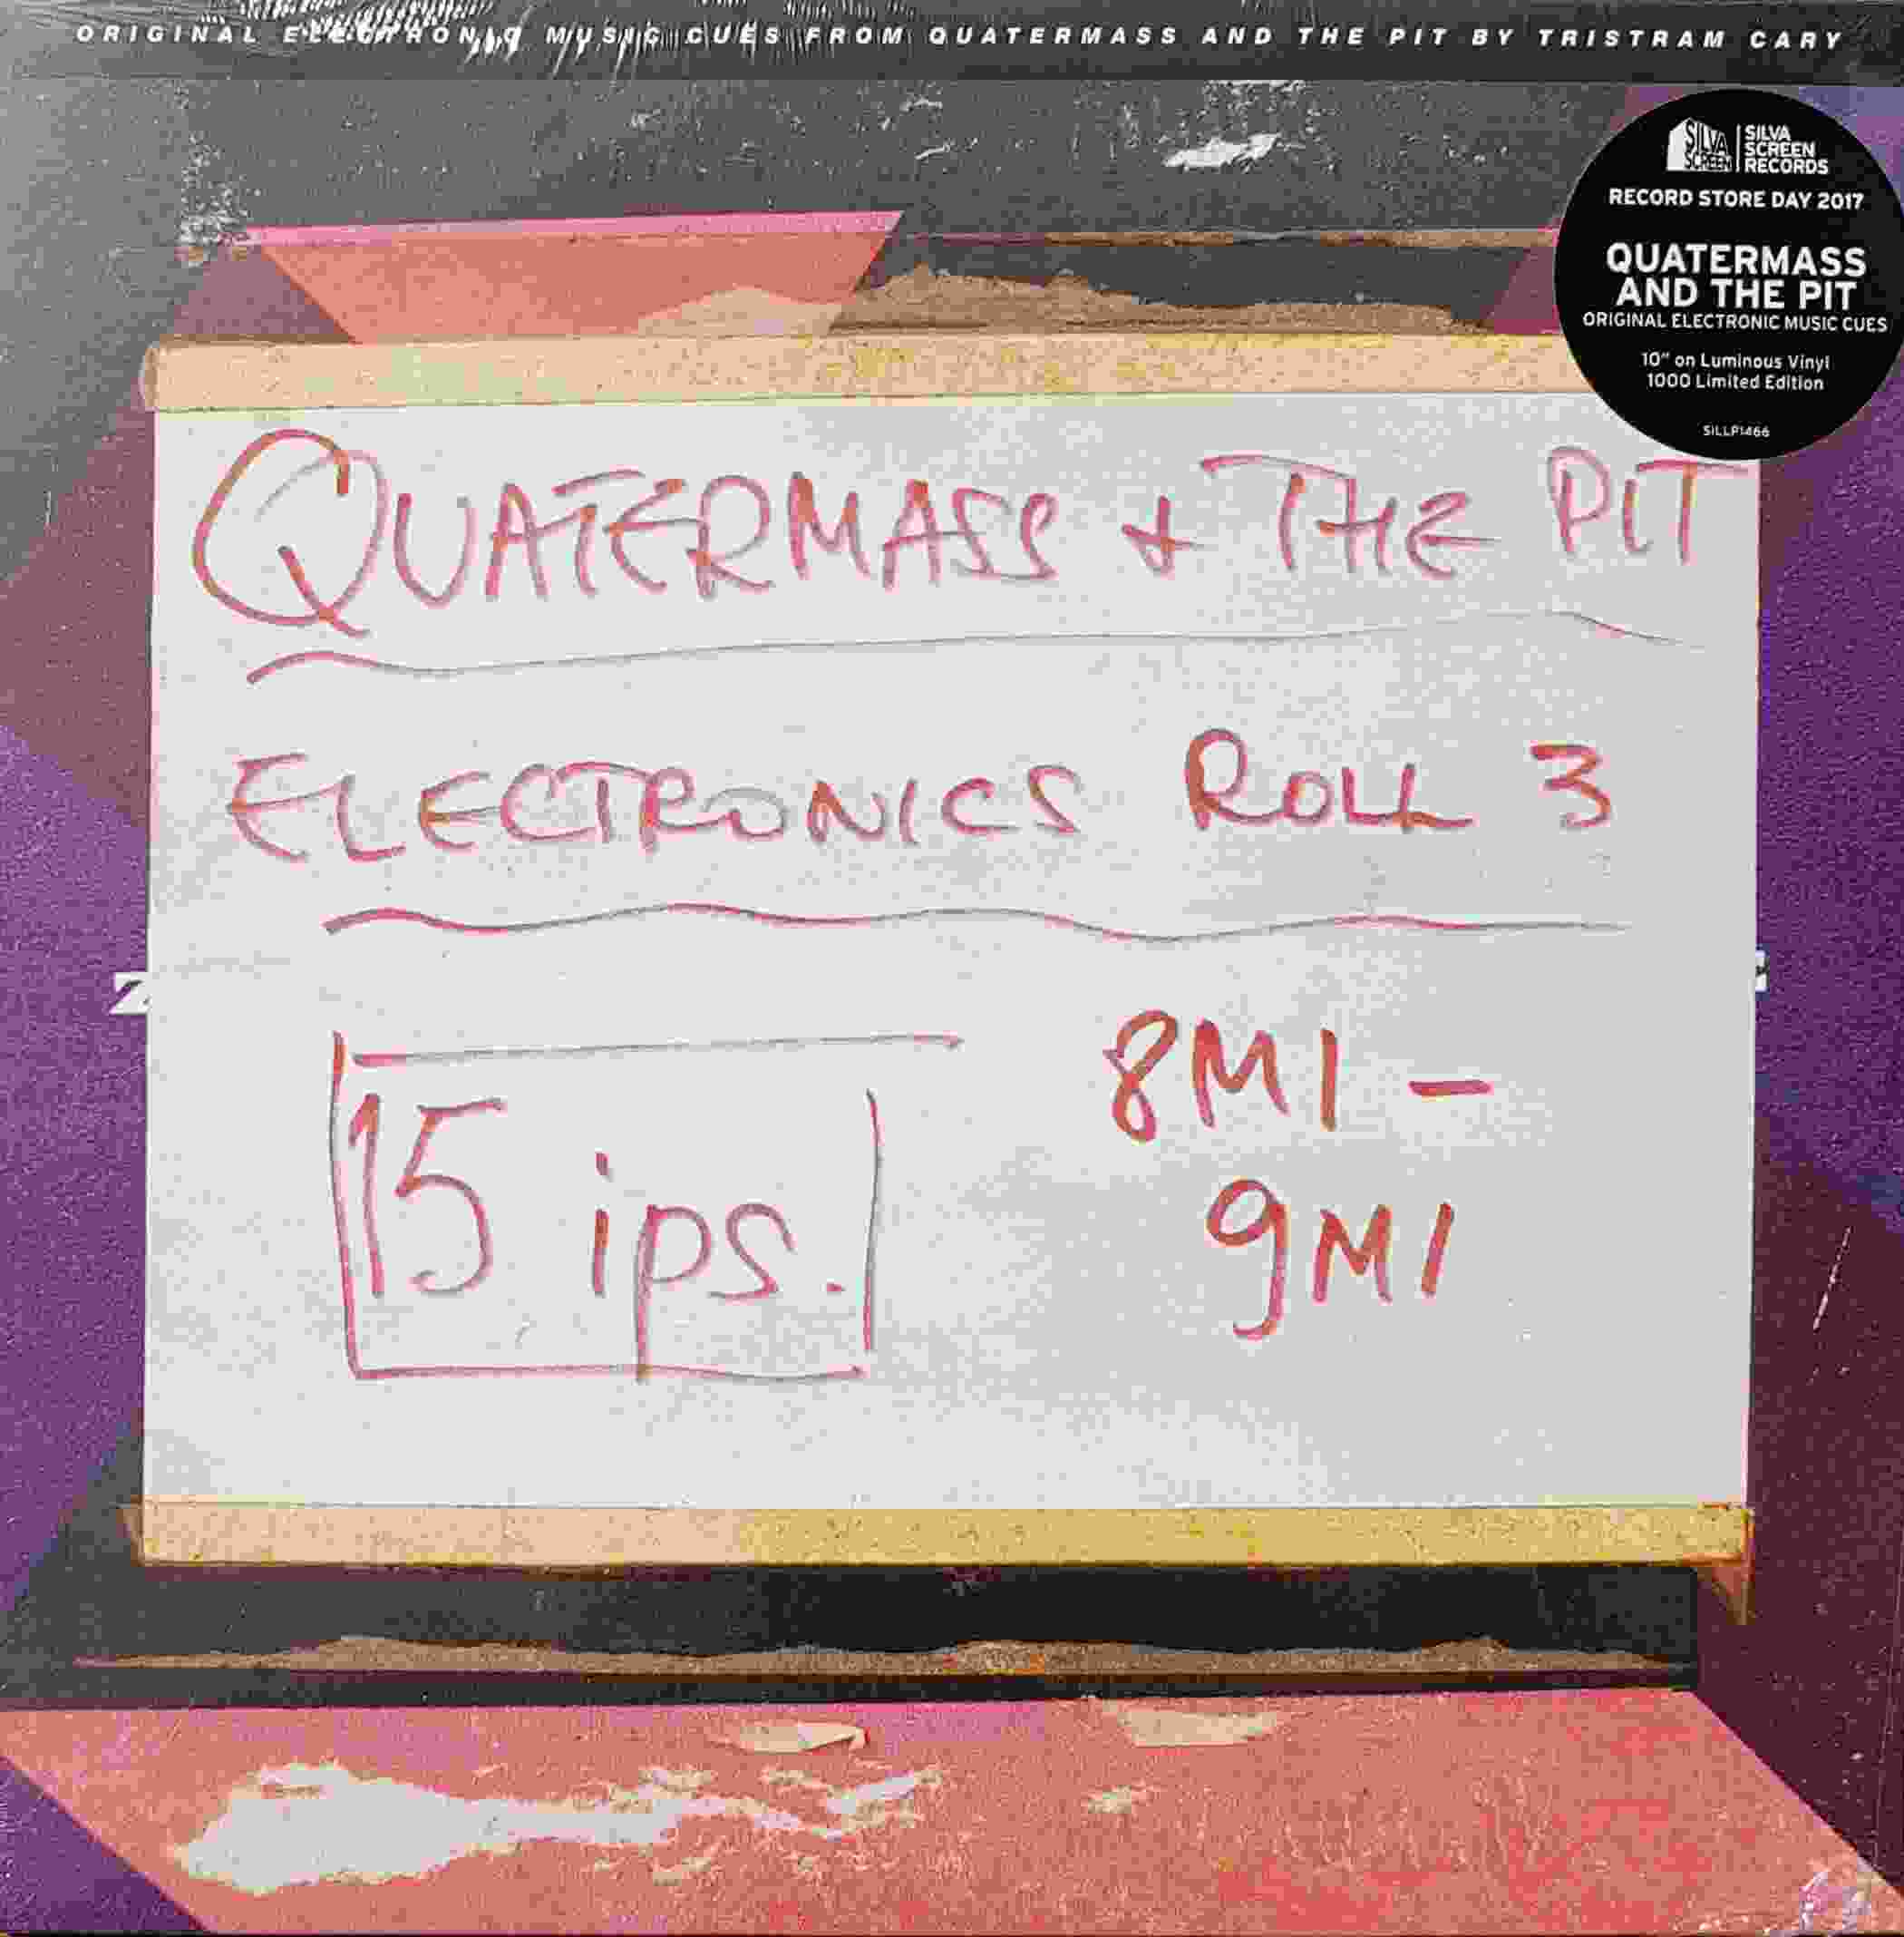 Picture of SILLP 1466 Quatermass and the pit - Limited edition - Record Store Day 2017 by artist Tristram Cary from the BBC 10inches - Records and Tapes library